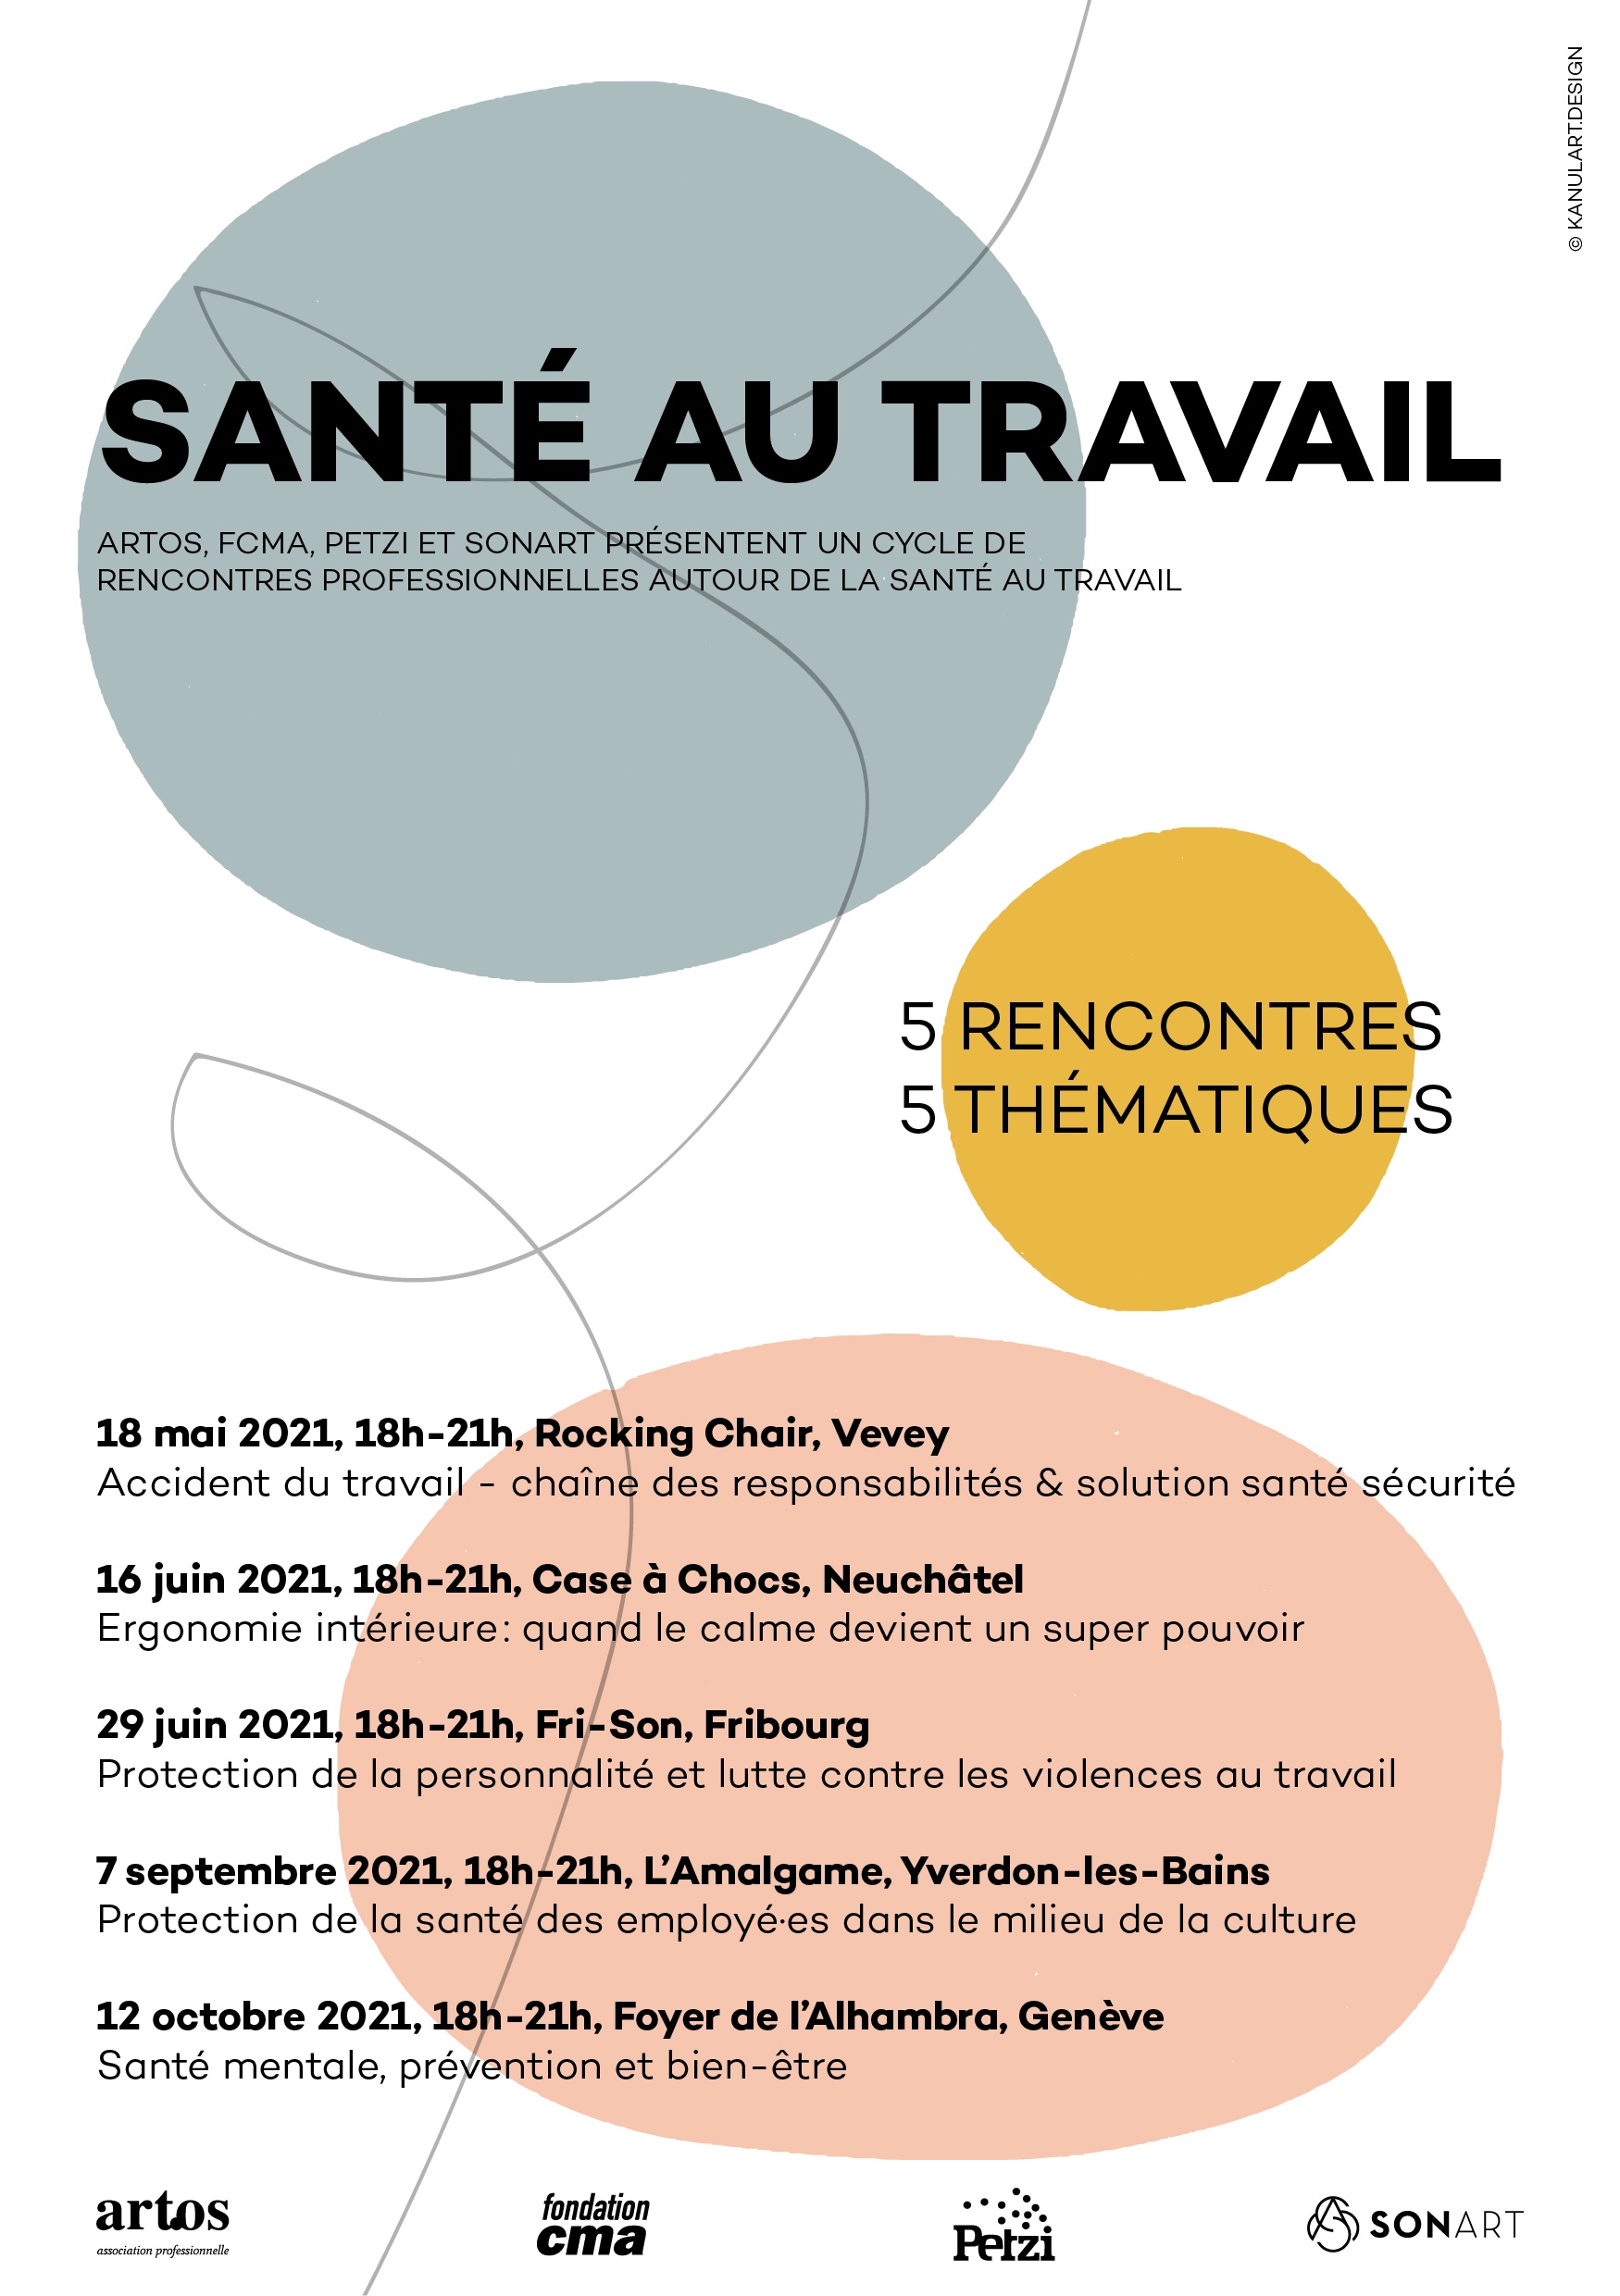 Flyer "Santé au travail" with names and dates of the five sessions